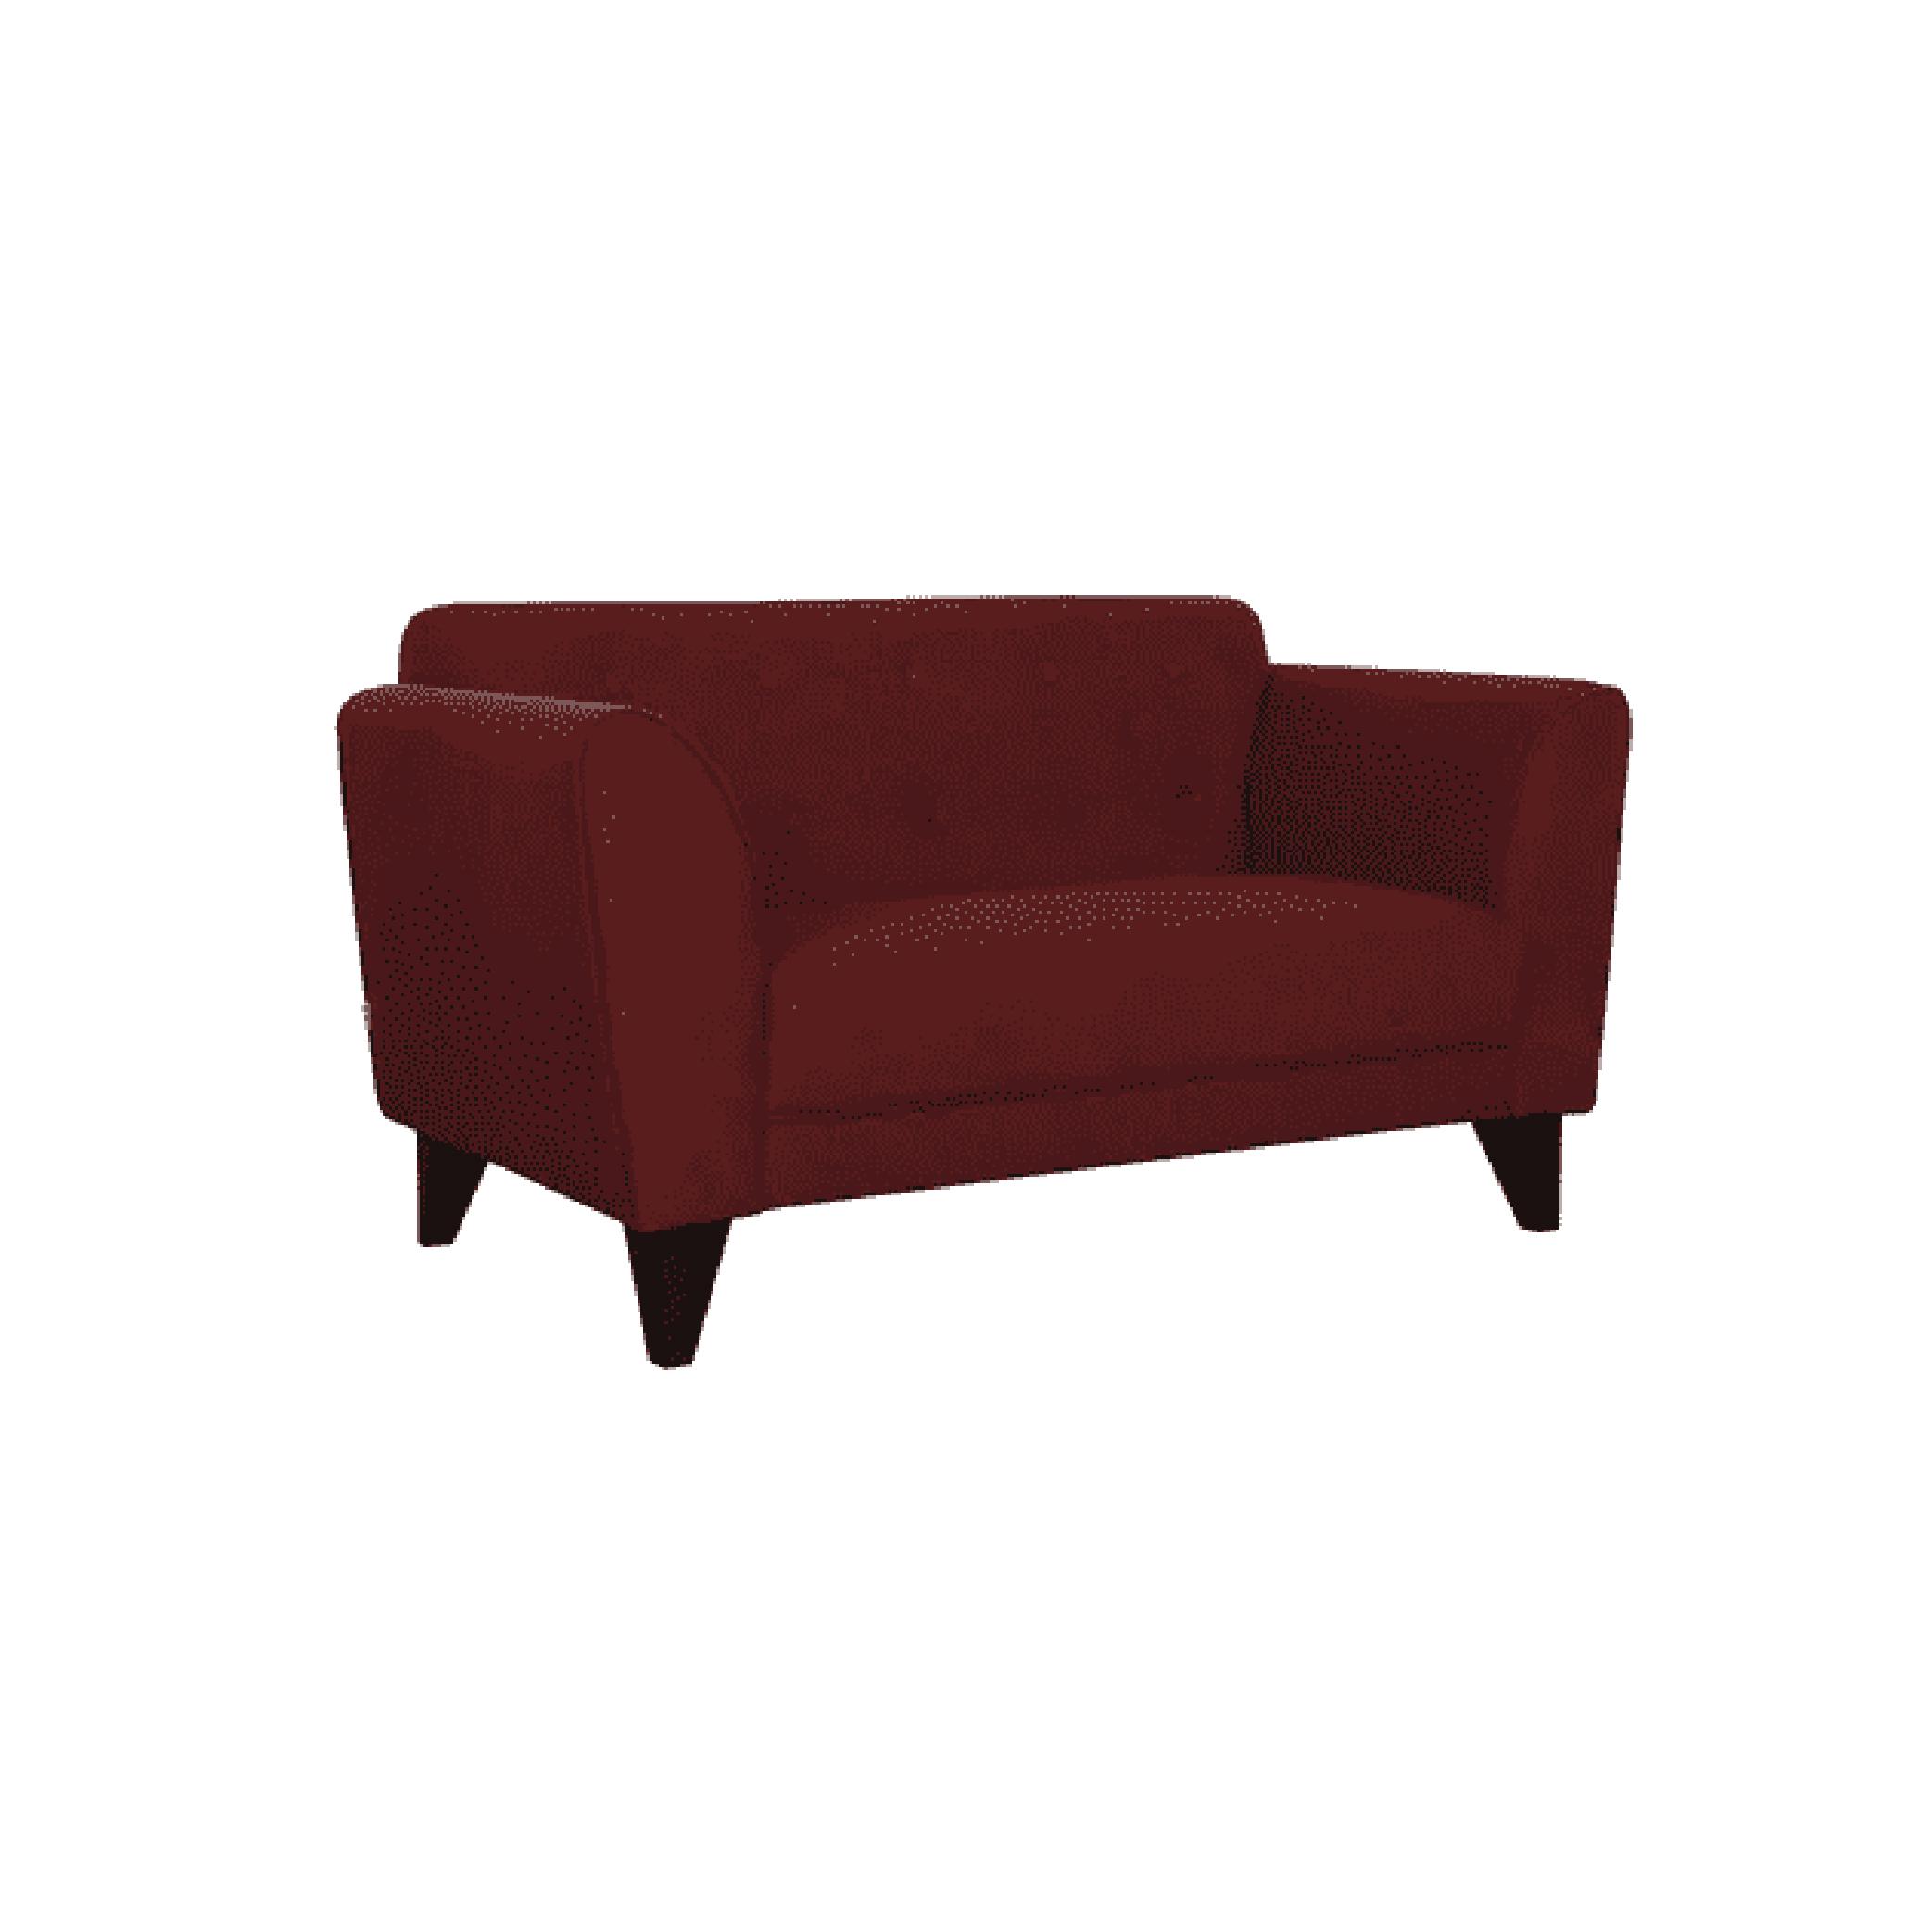 Ortici Two Seater Sofa in Garnet Red Color